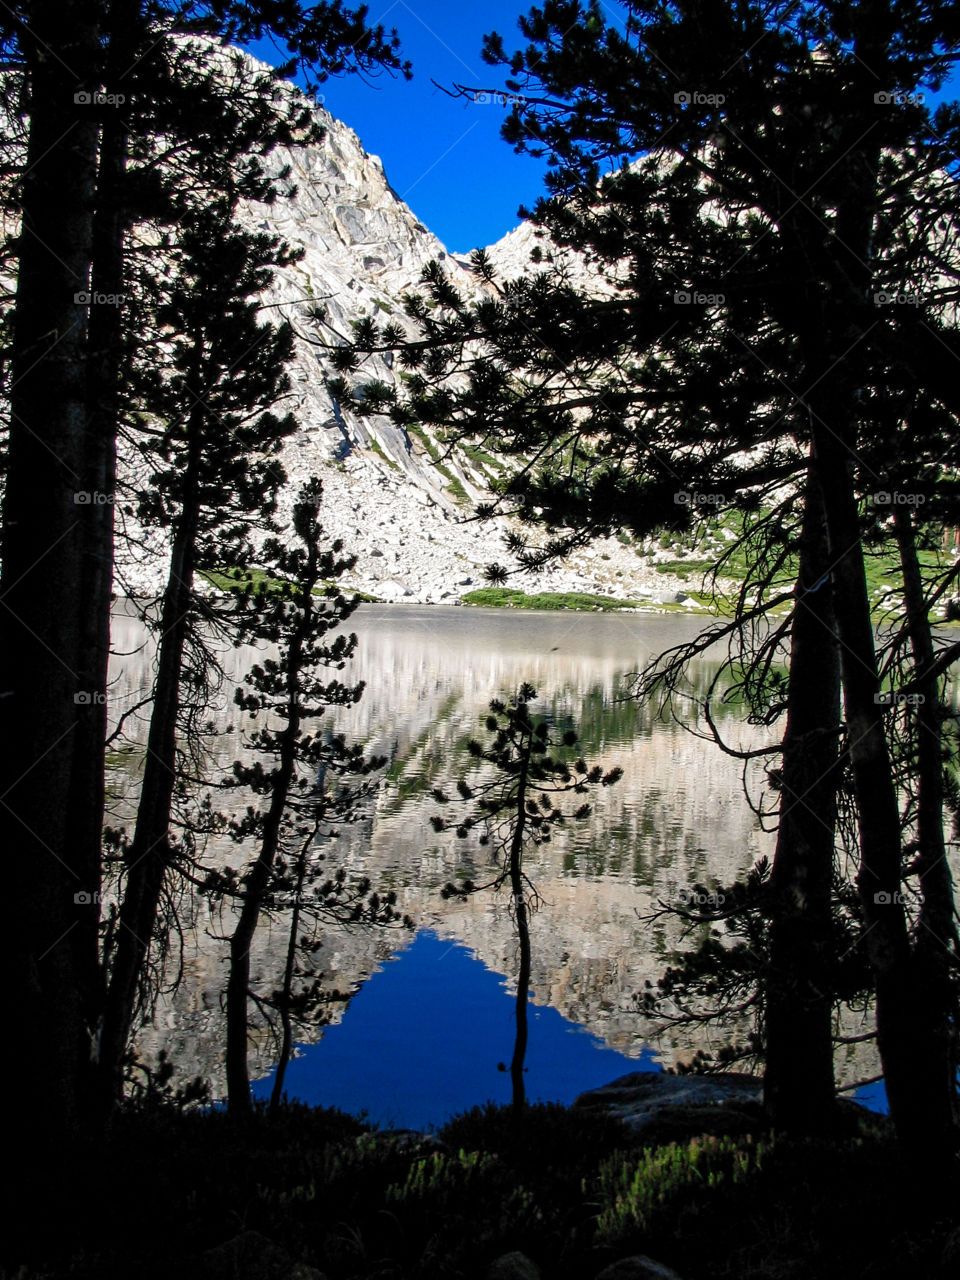 One of the Young Lakes in Yosemite, California behind the silhouette of trees.